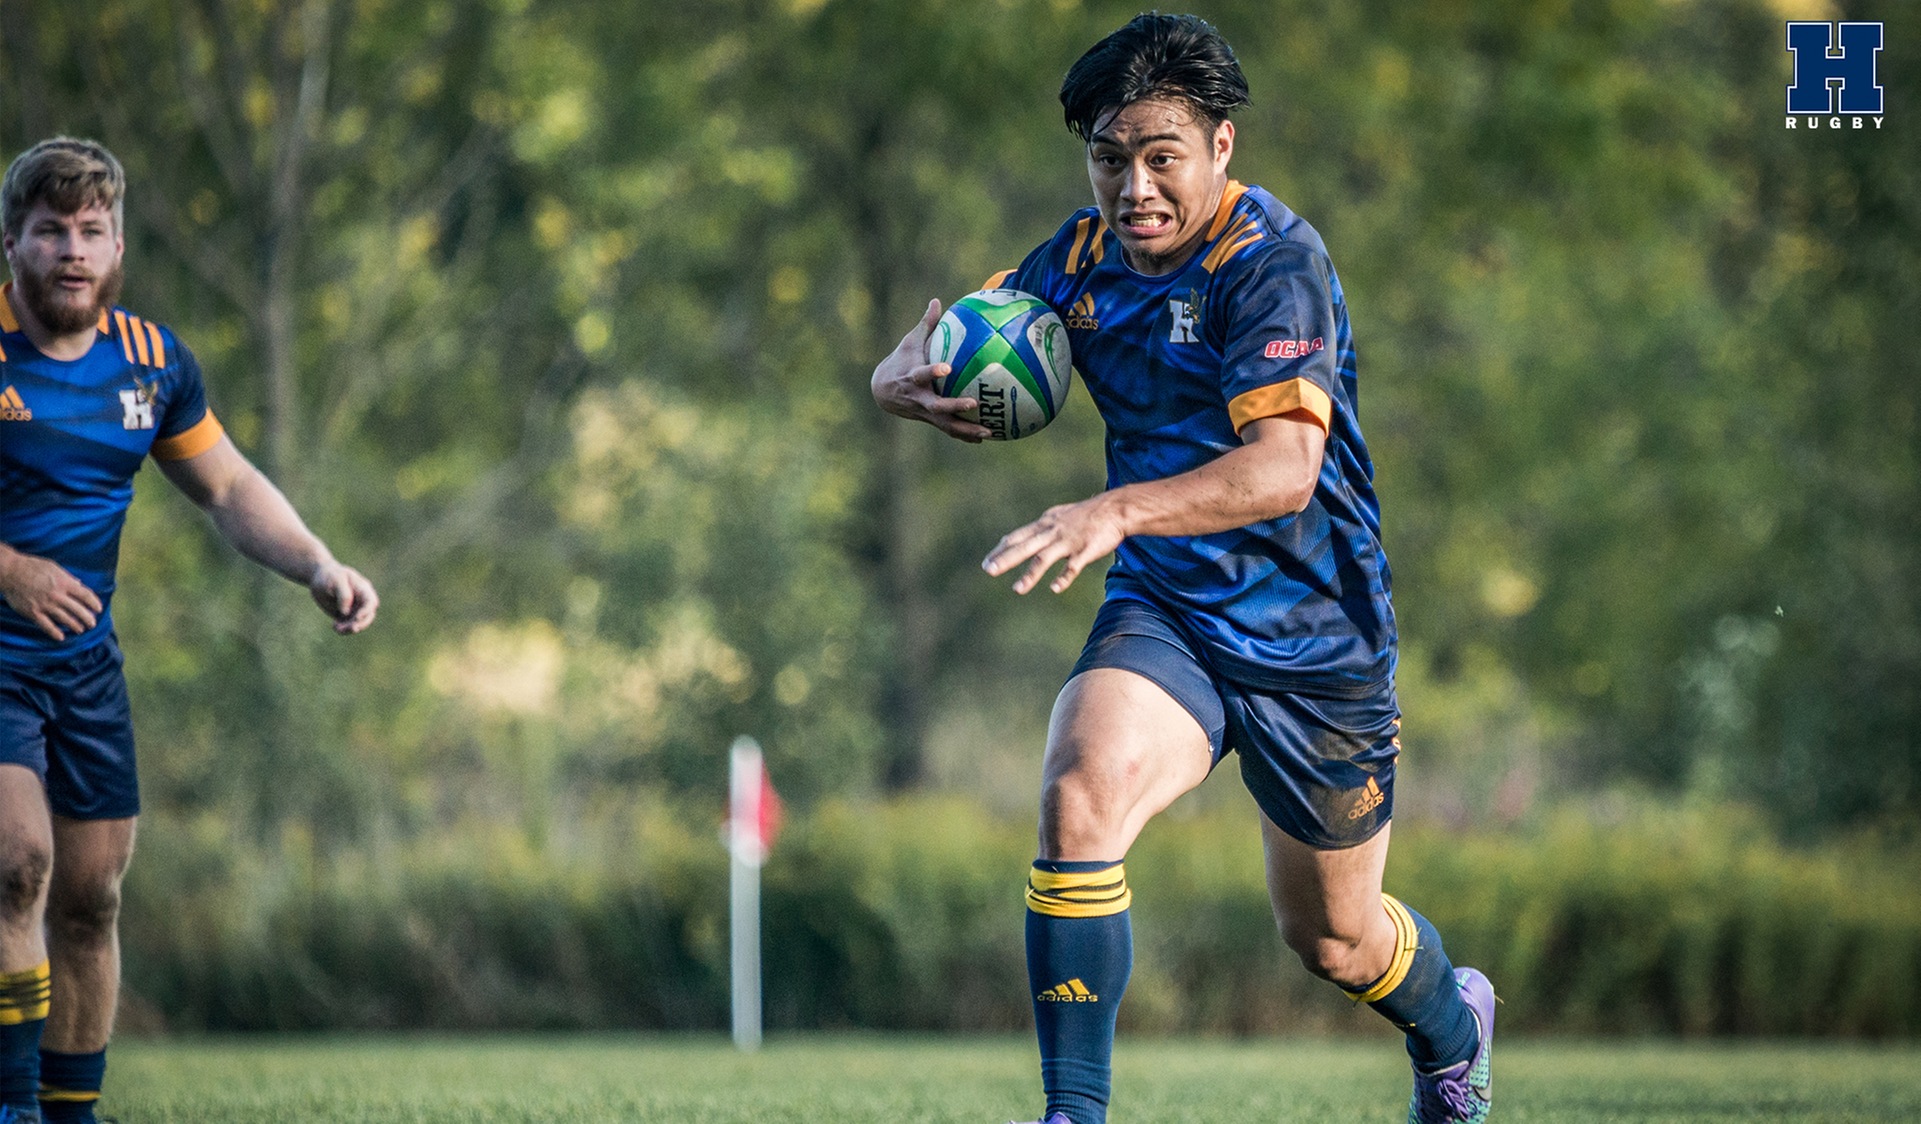 Humber Rugby Earns Playoff Spot With Win Over Conestoga